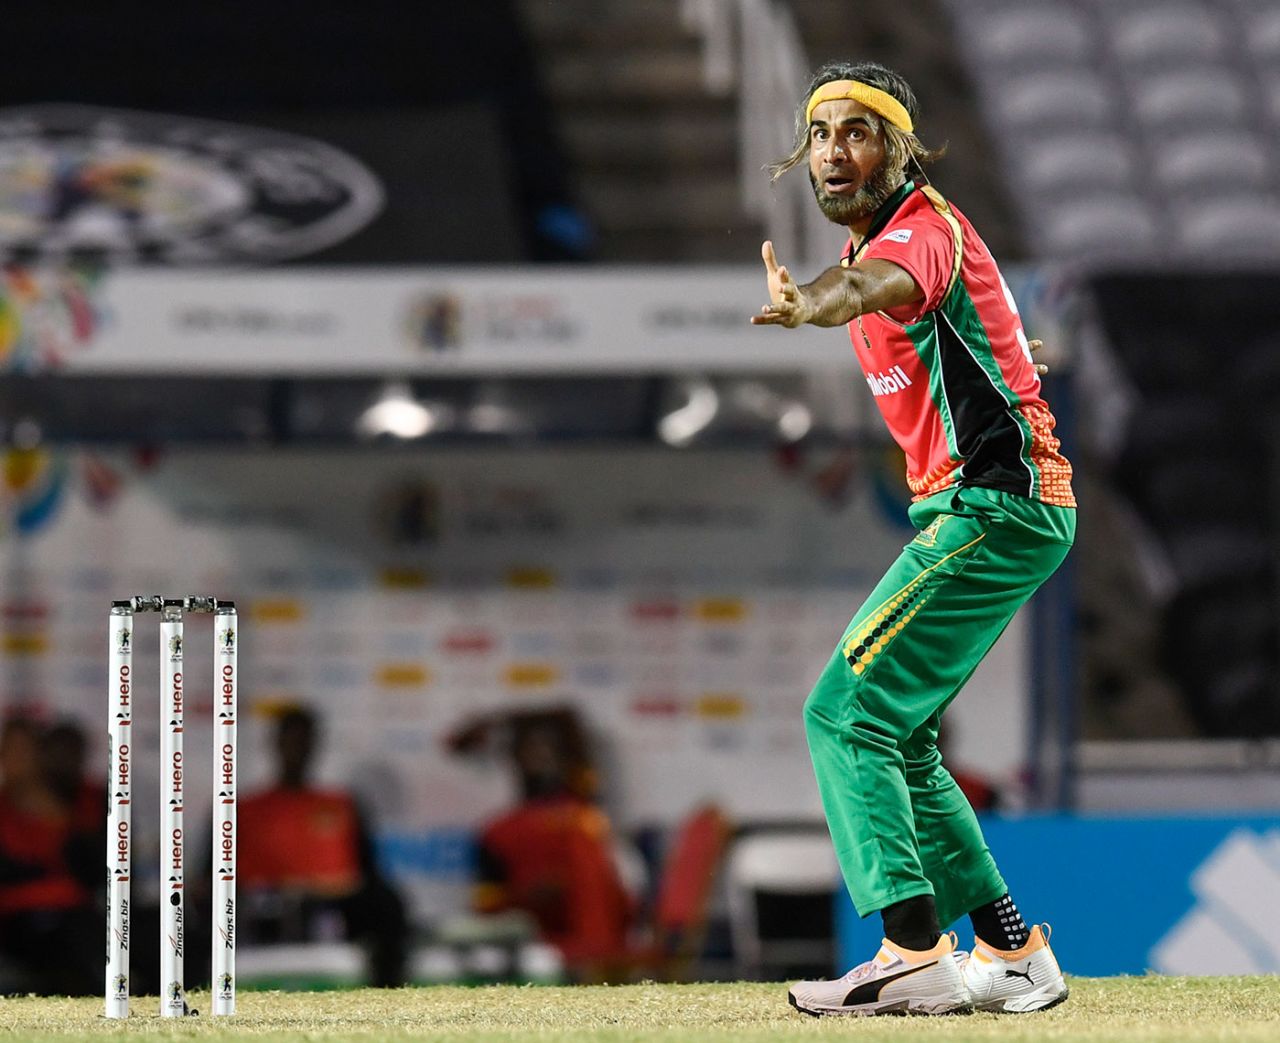 Imran Tahir took two wickets in a miserly spell, Guyana Amazon Warriors v St Kitts and Nevis Patriots, CPL 2020, Trinidad, August 19, 2020